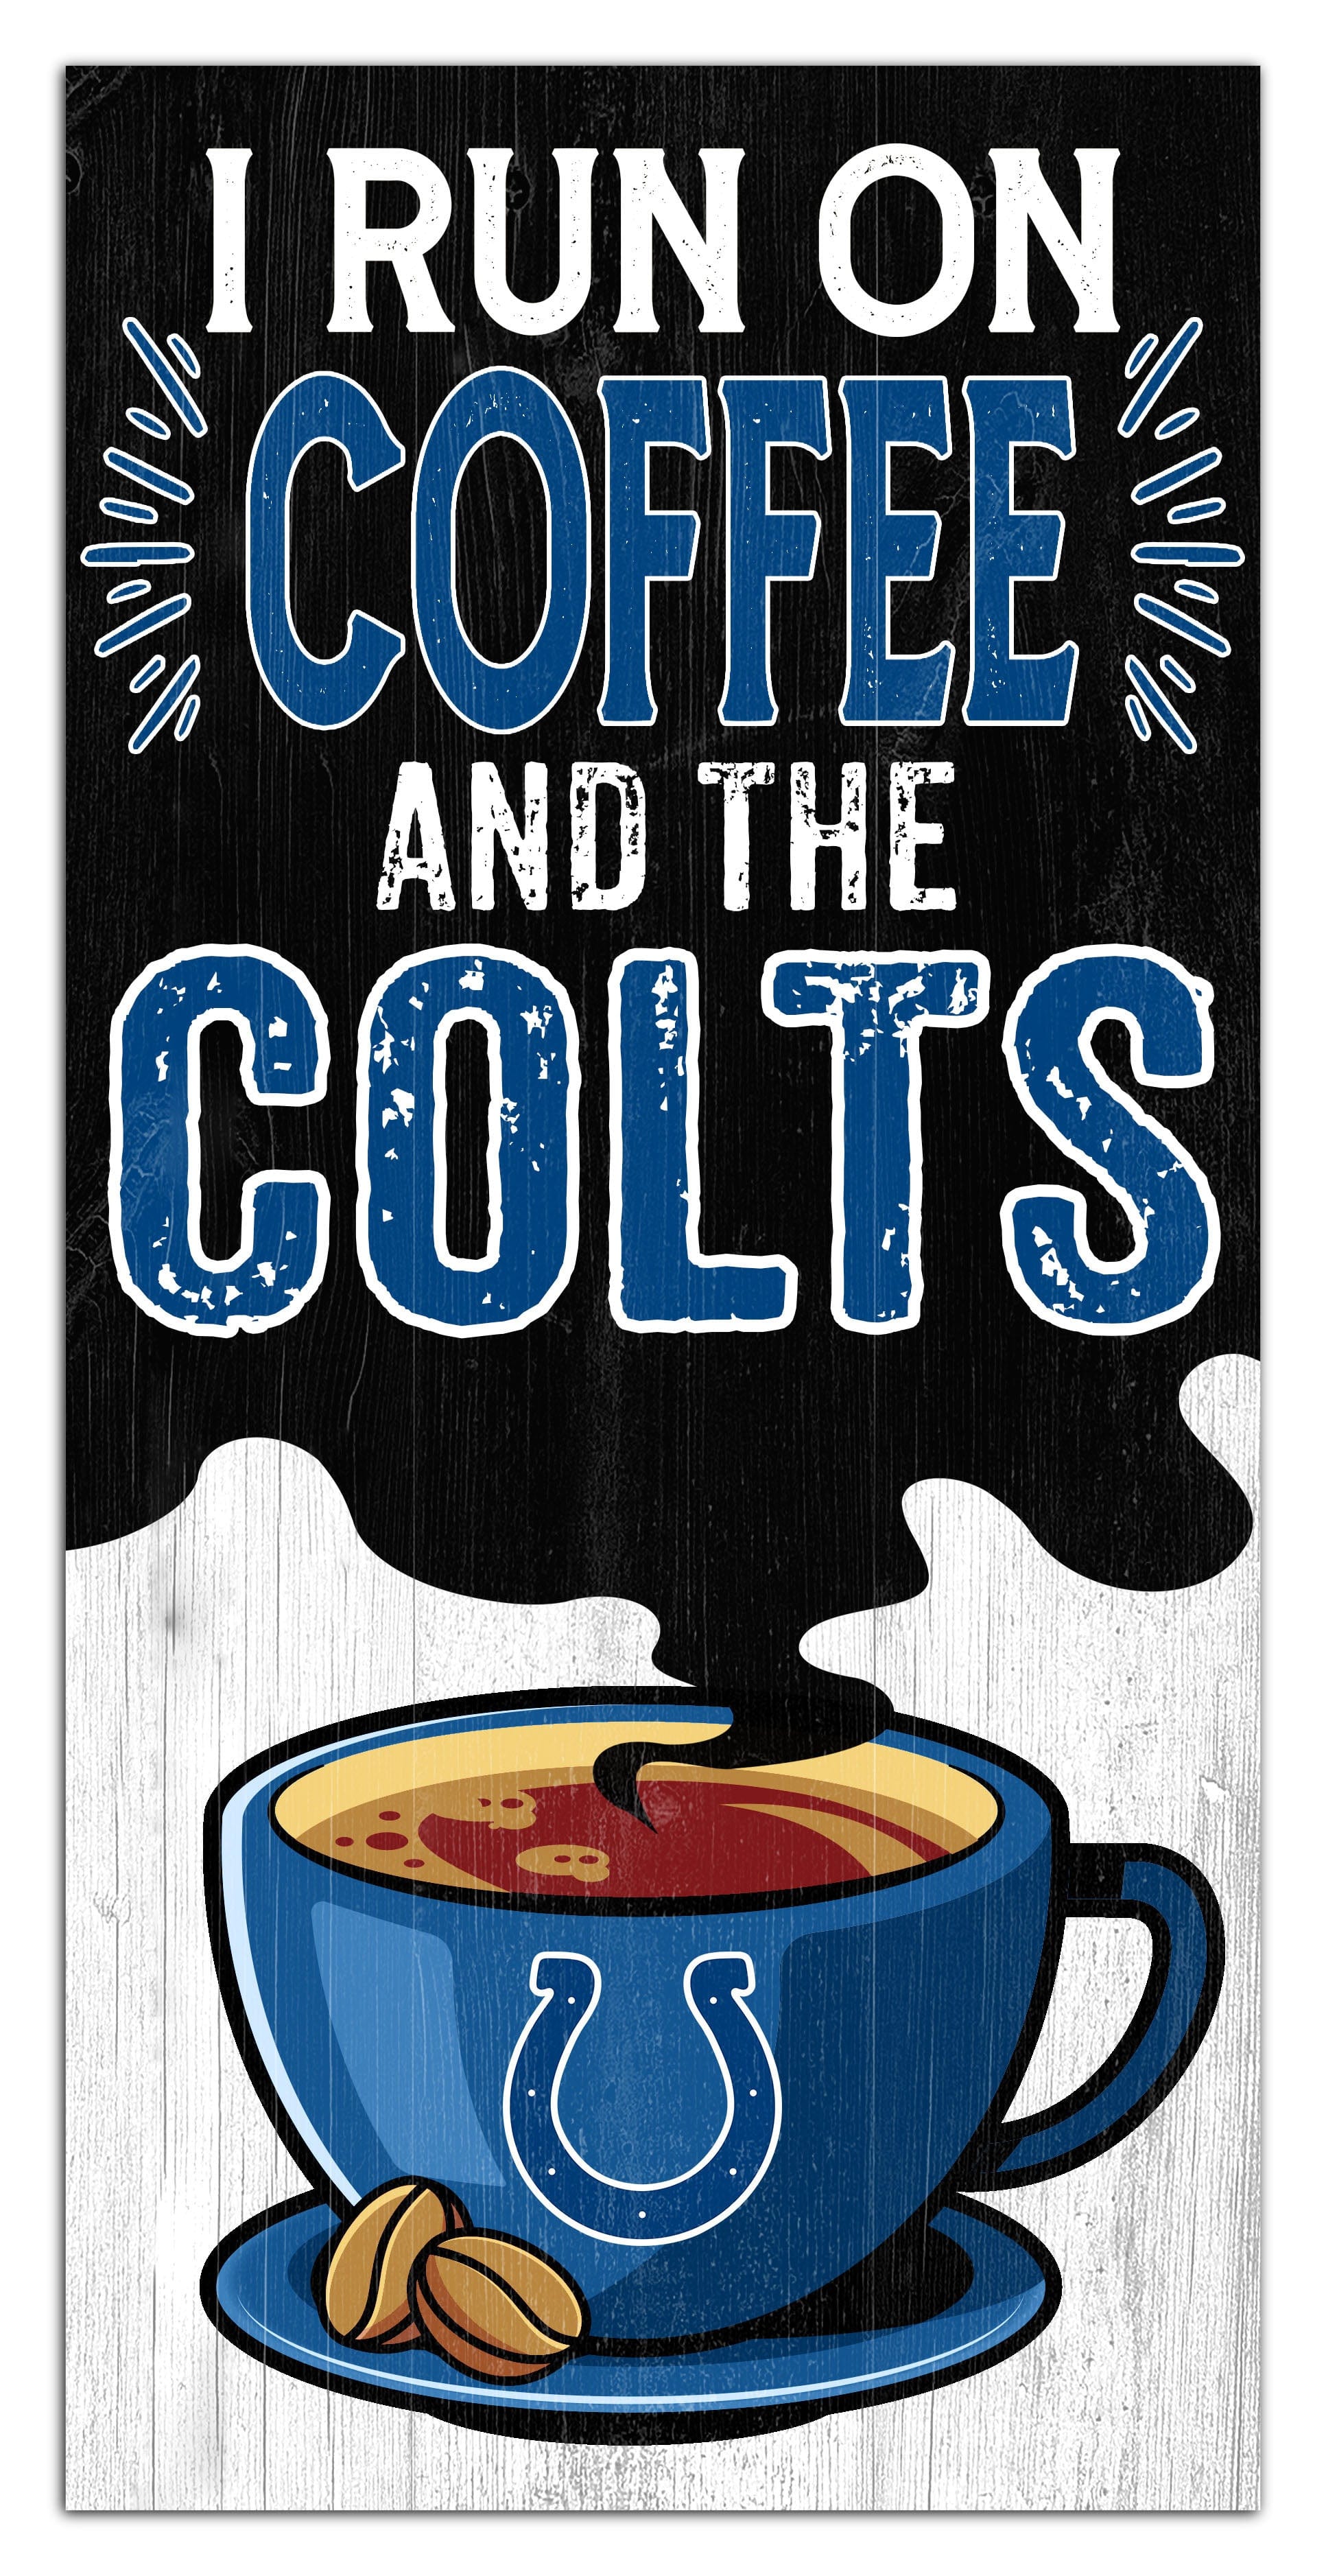 Indianapolis Colts Coffee Cups, Indianapolis Colts Mugs, Colts